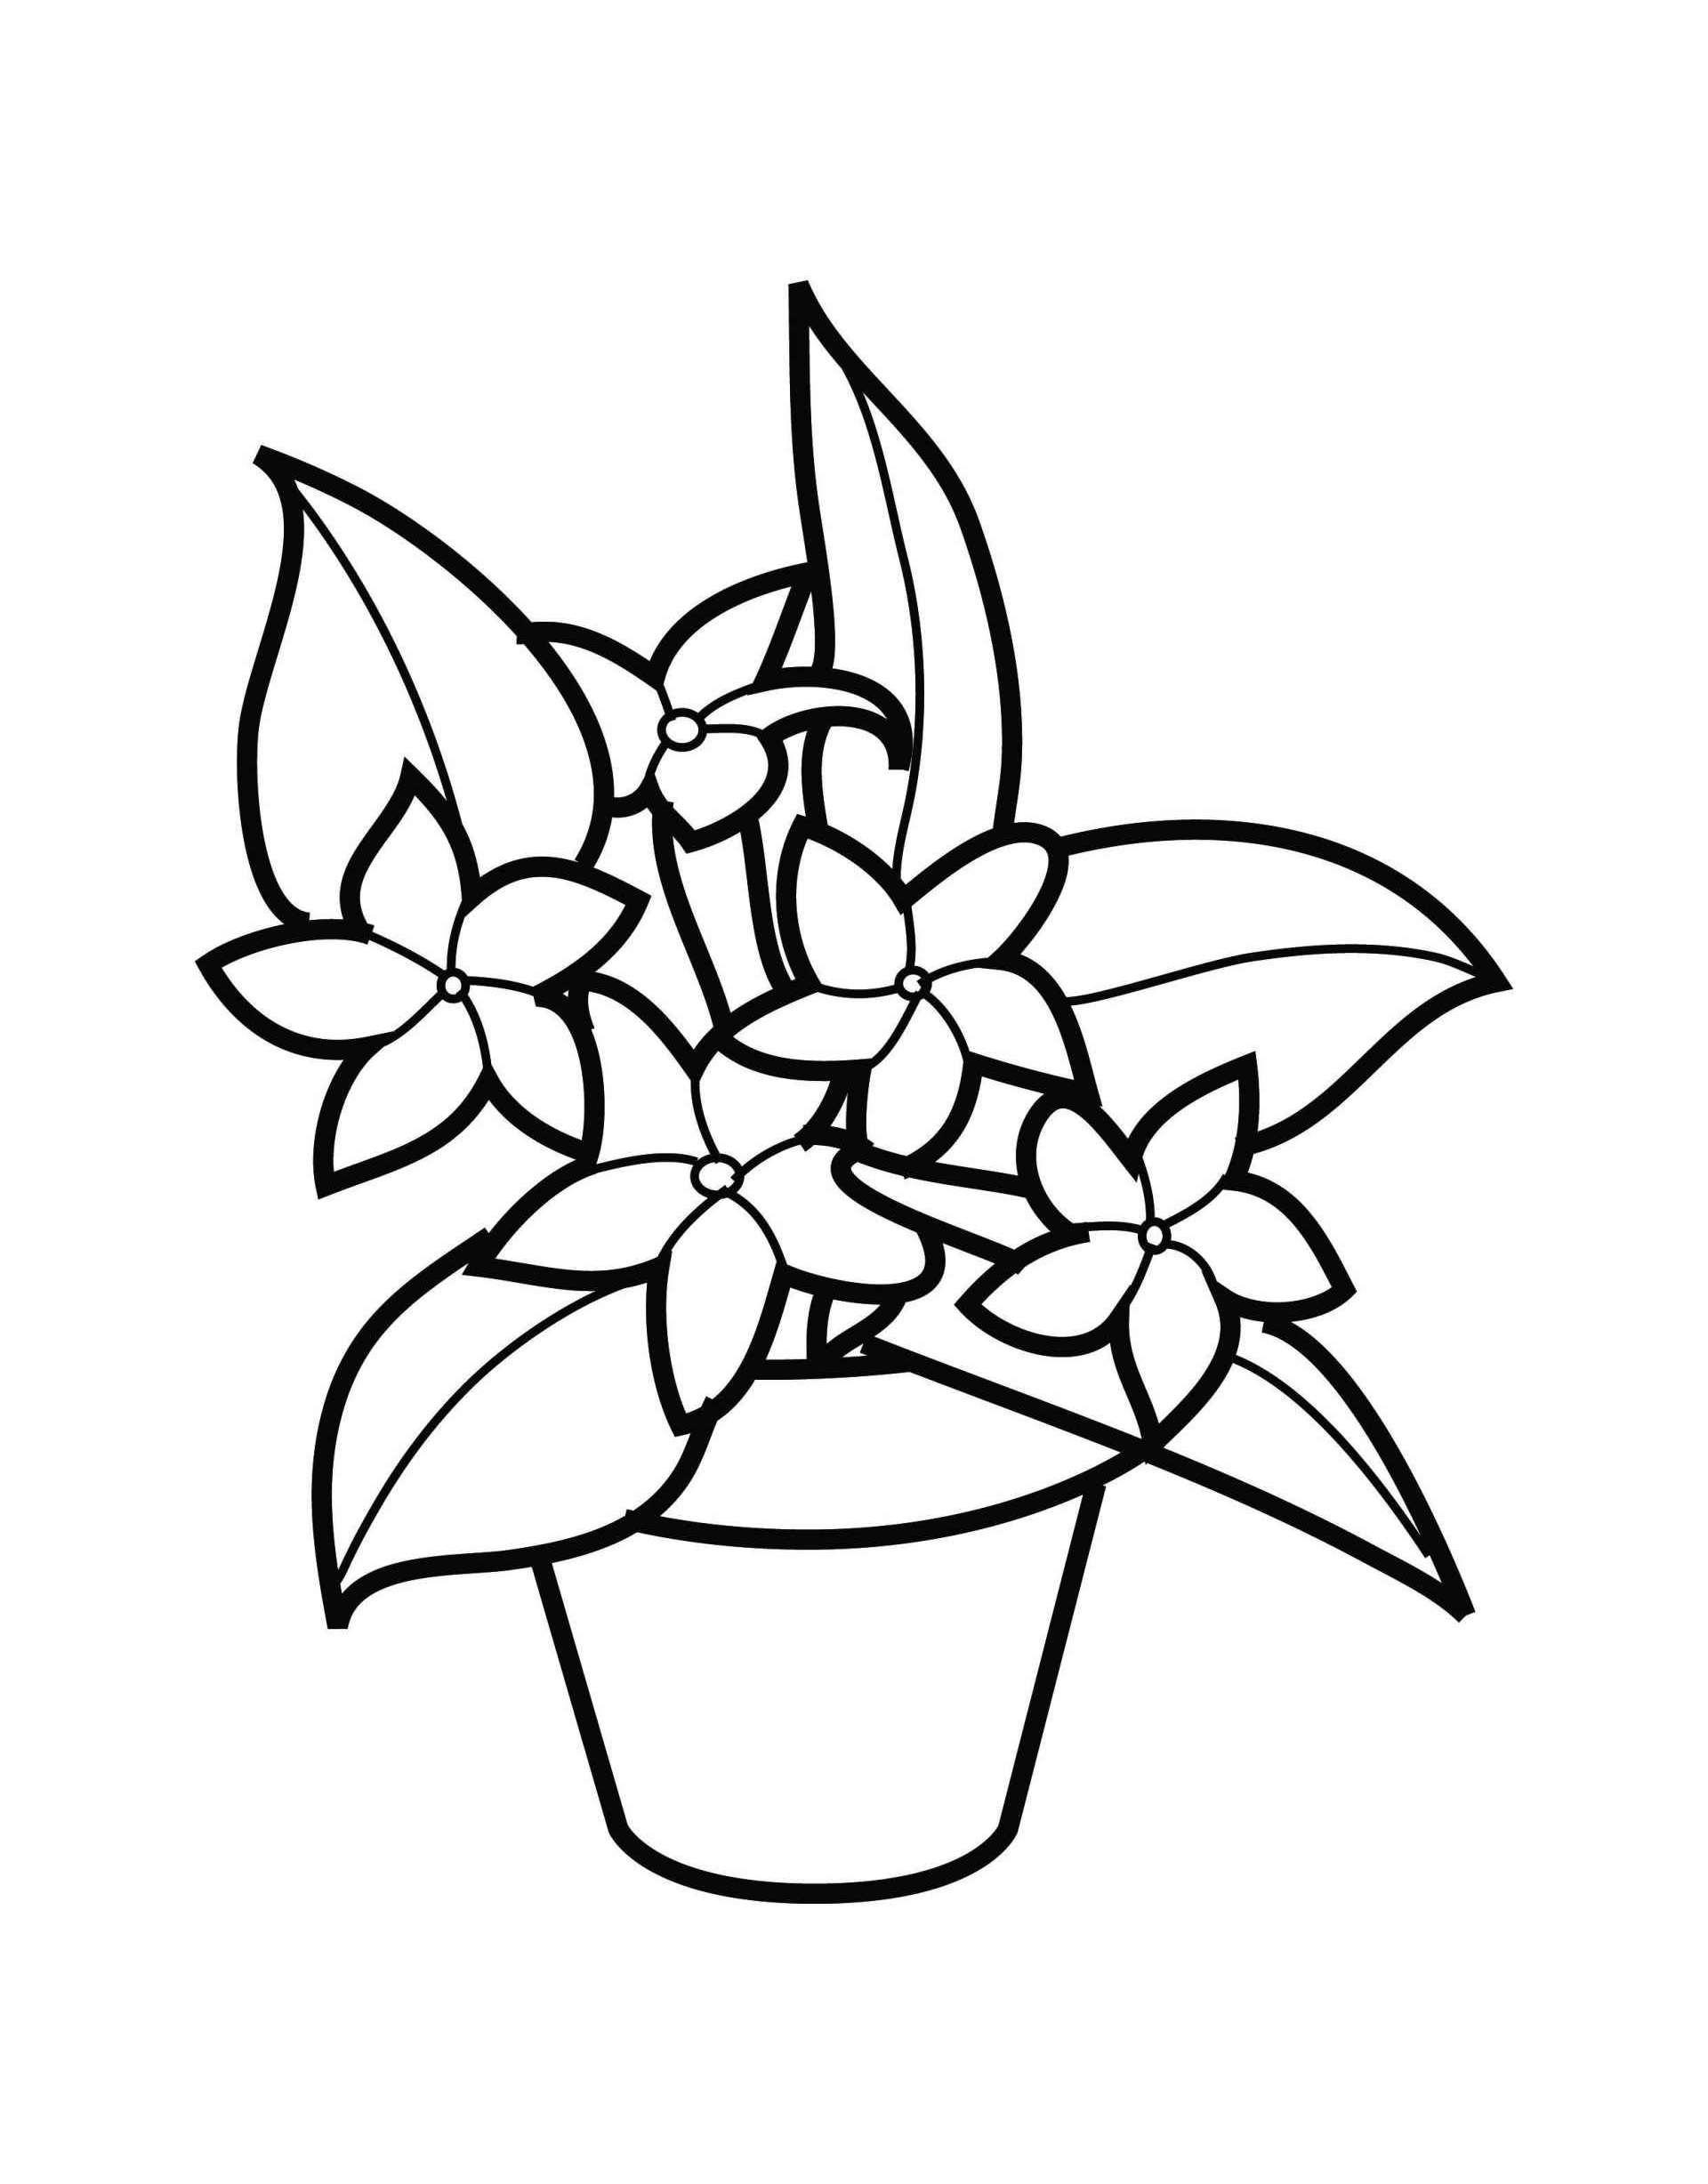 Flowers In A Pot Coloring Page